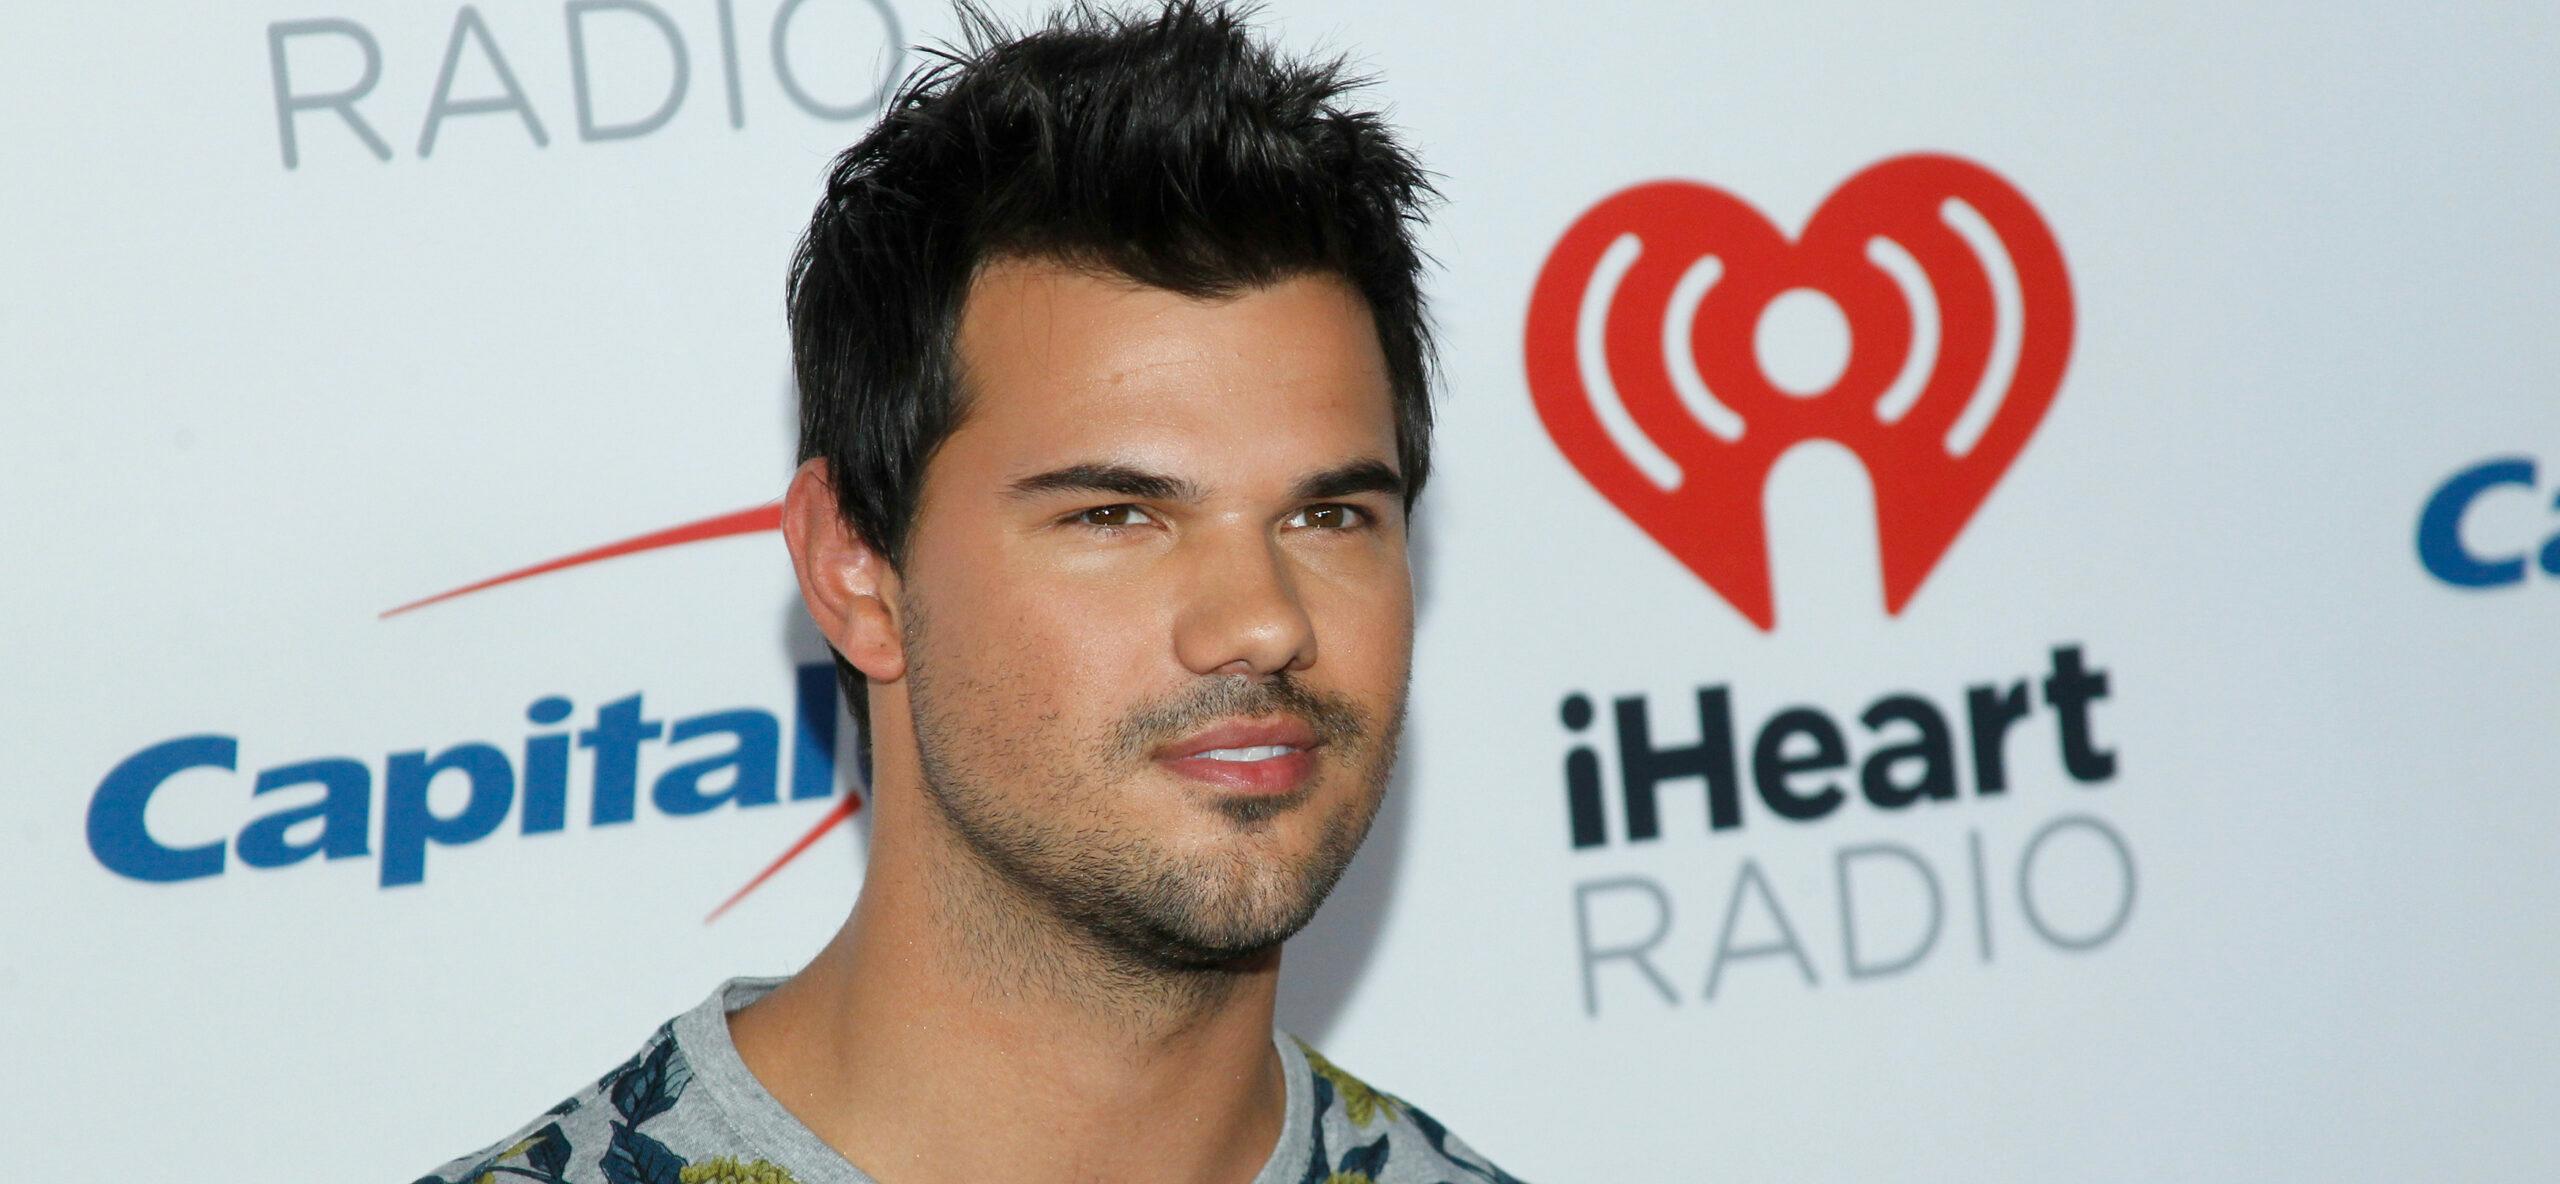 Taylor Lautner at the 2017 iHeartRadio Music Festival